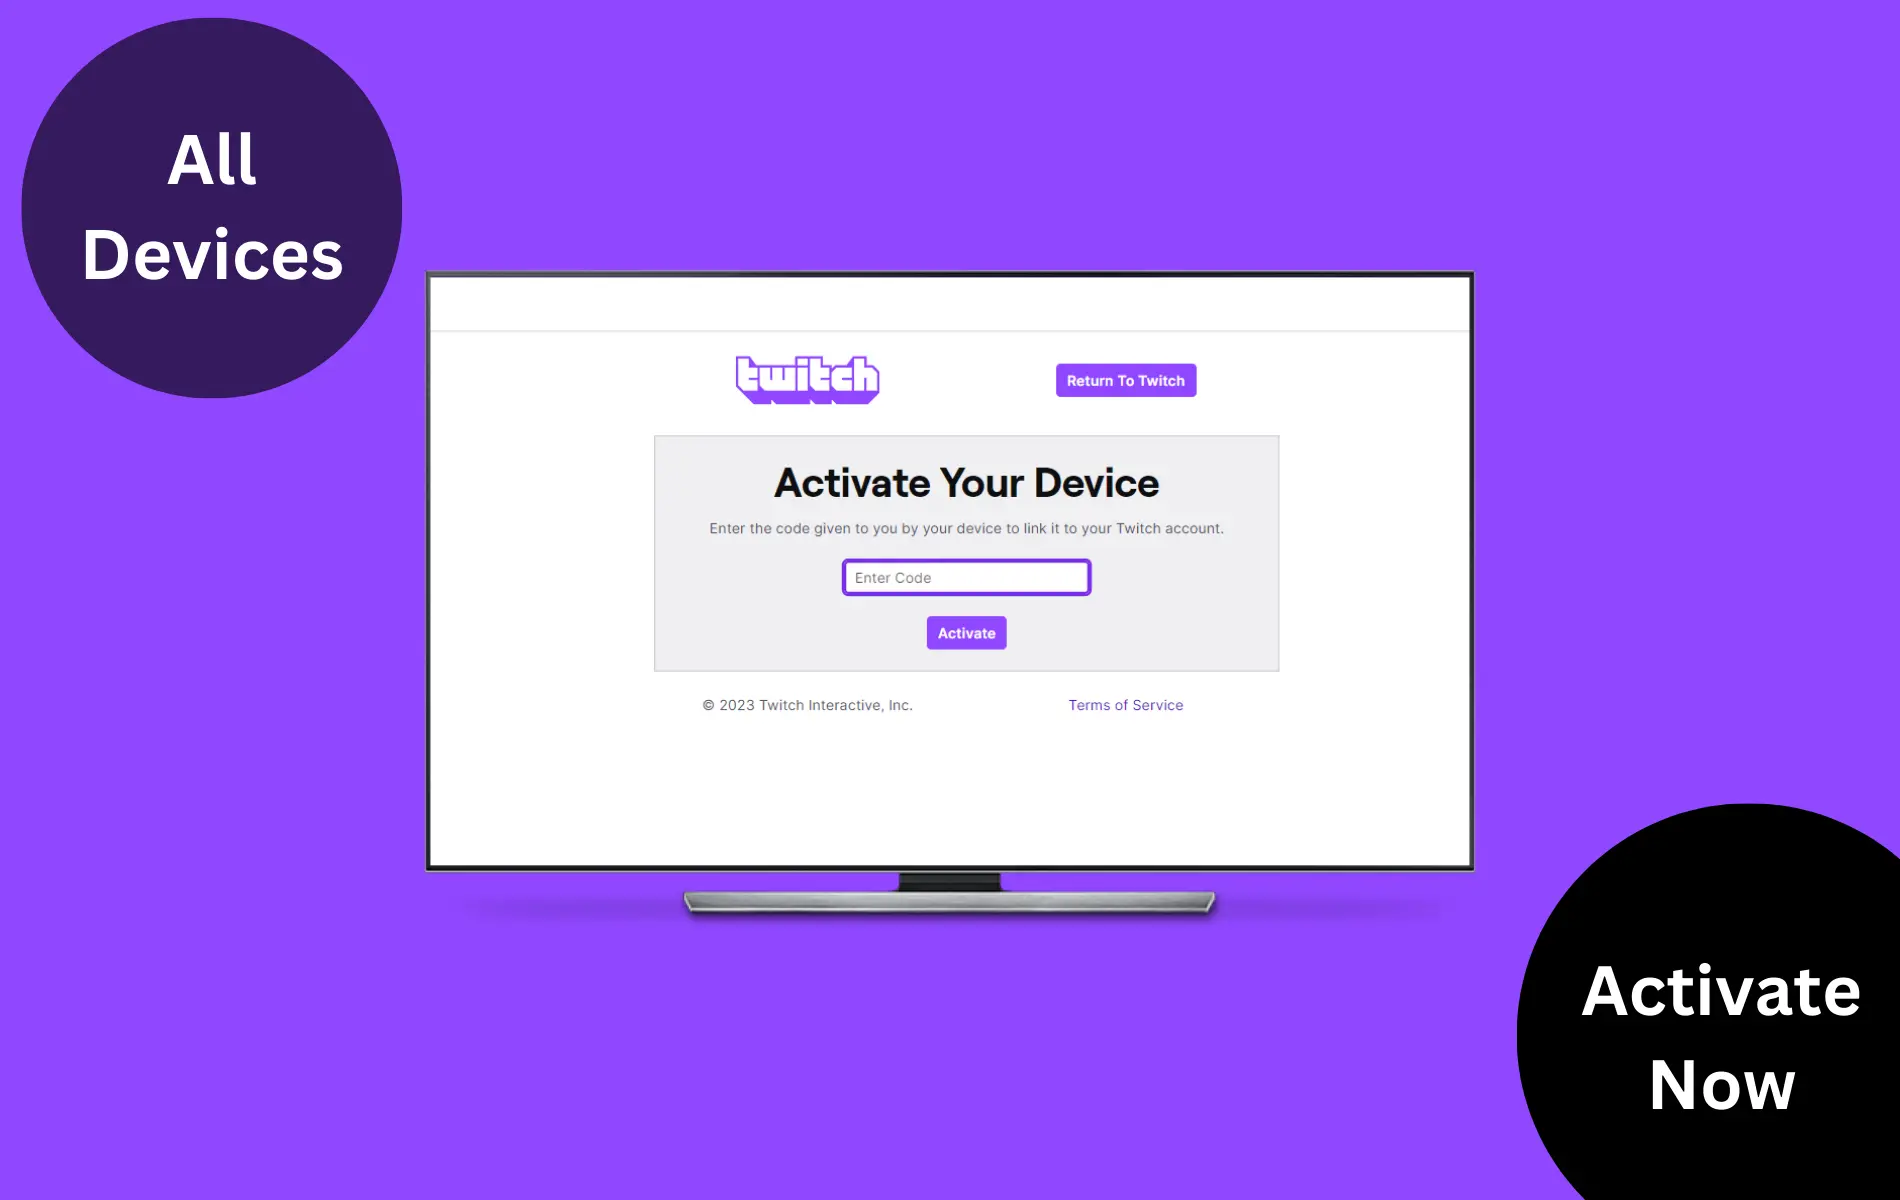 The Twitch official page where users can activate and enter the activation code. This allows users to watch live streams of their favorite games on their consoles.